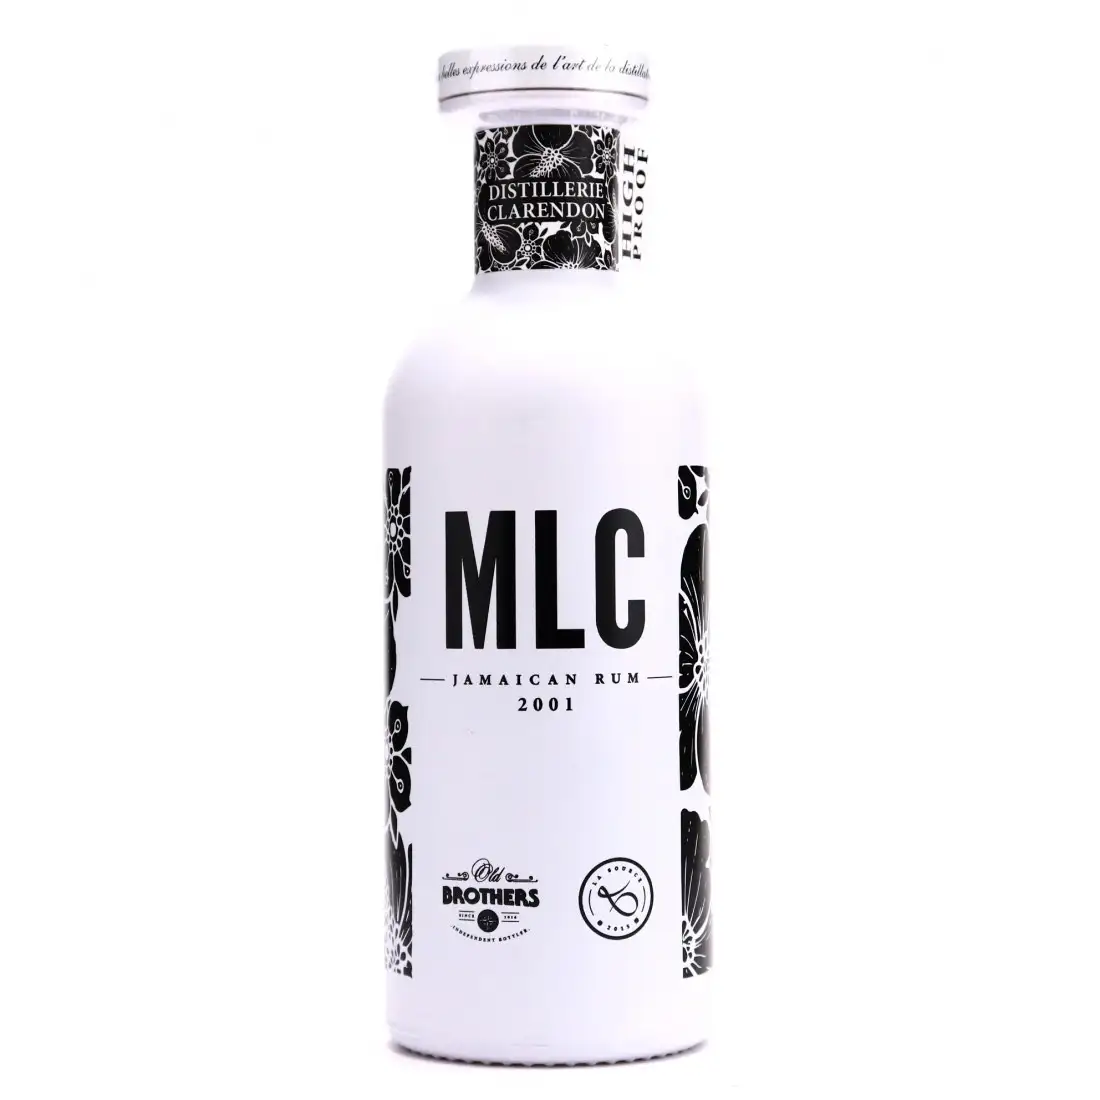 Image of the front of the bottle of the rum Clarendon MLC